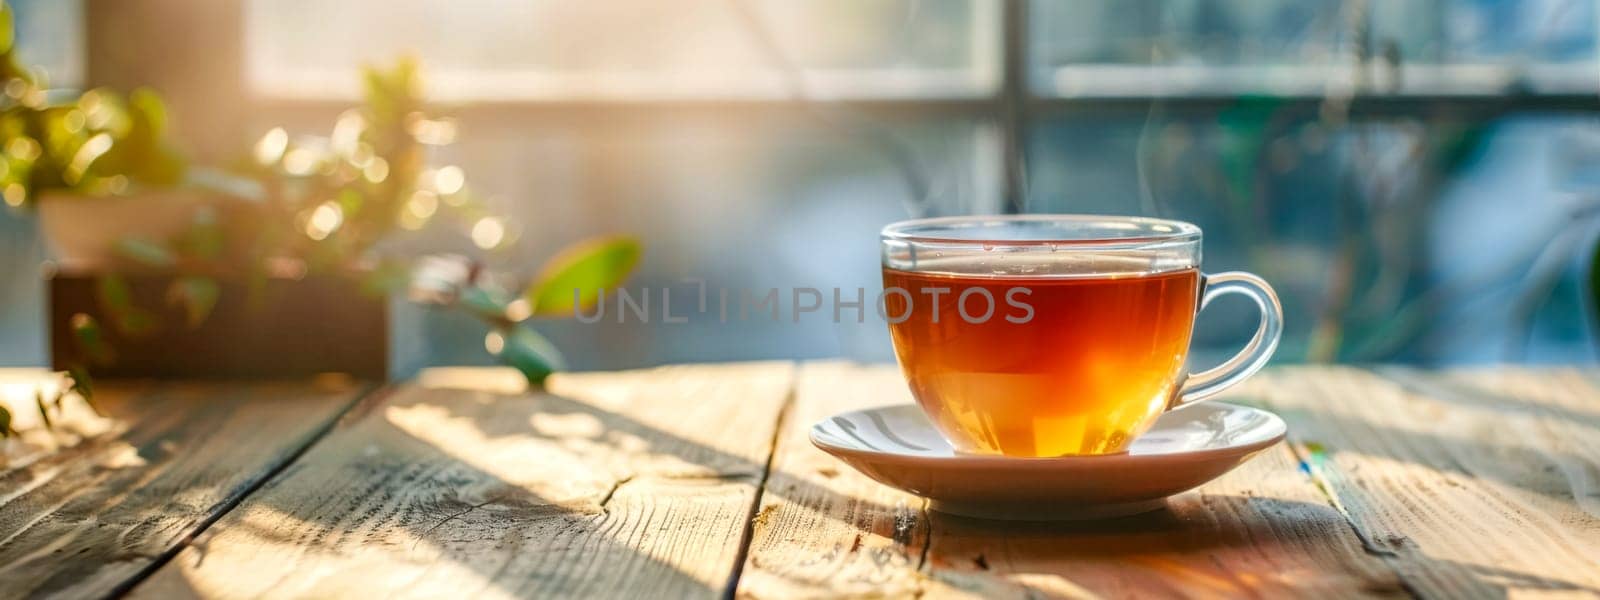 A peaceful and cozy morning tea time with a warm cup of herbal beverage on a rustic wooden tabletop. Soaking in the sunlight and tranquility